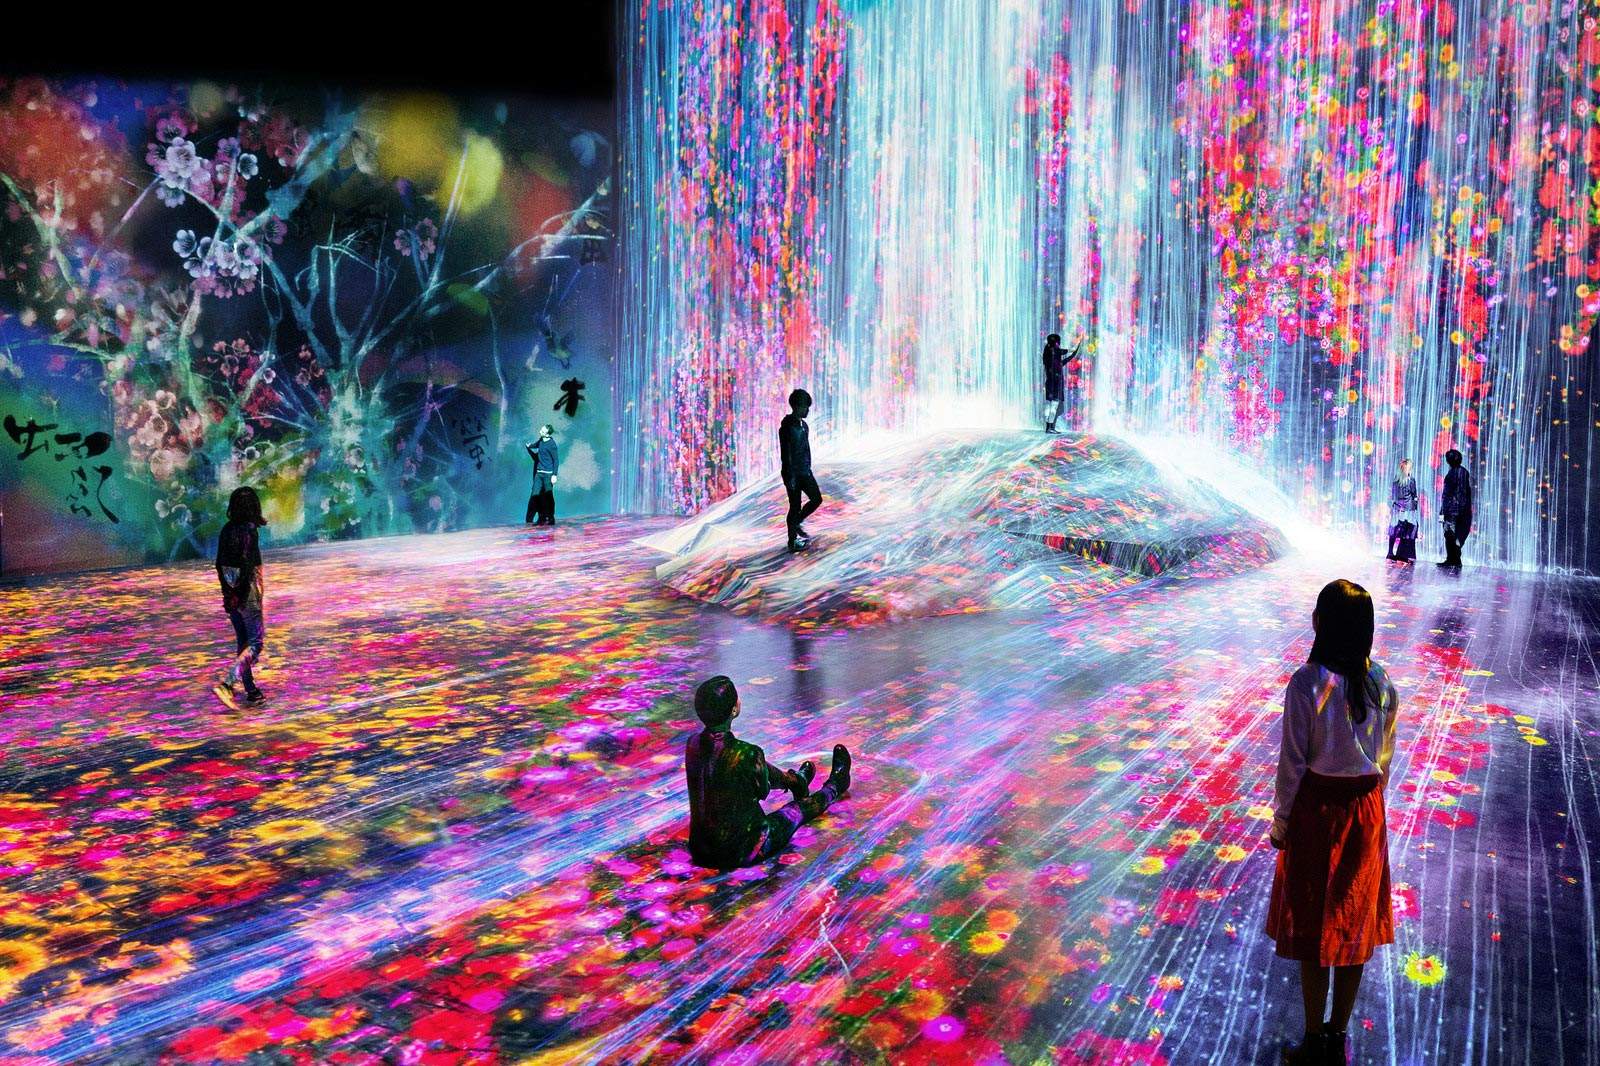 USA, Pace Gallery launches company dedicated to designing immersive art spaces